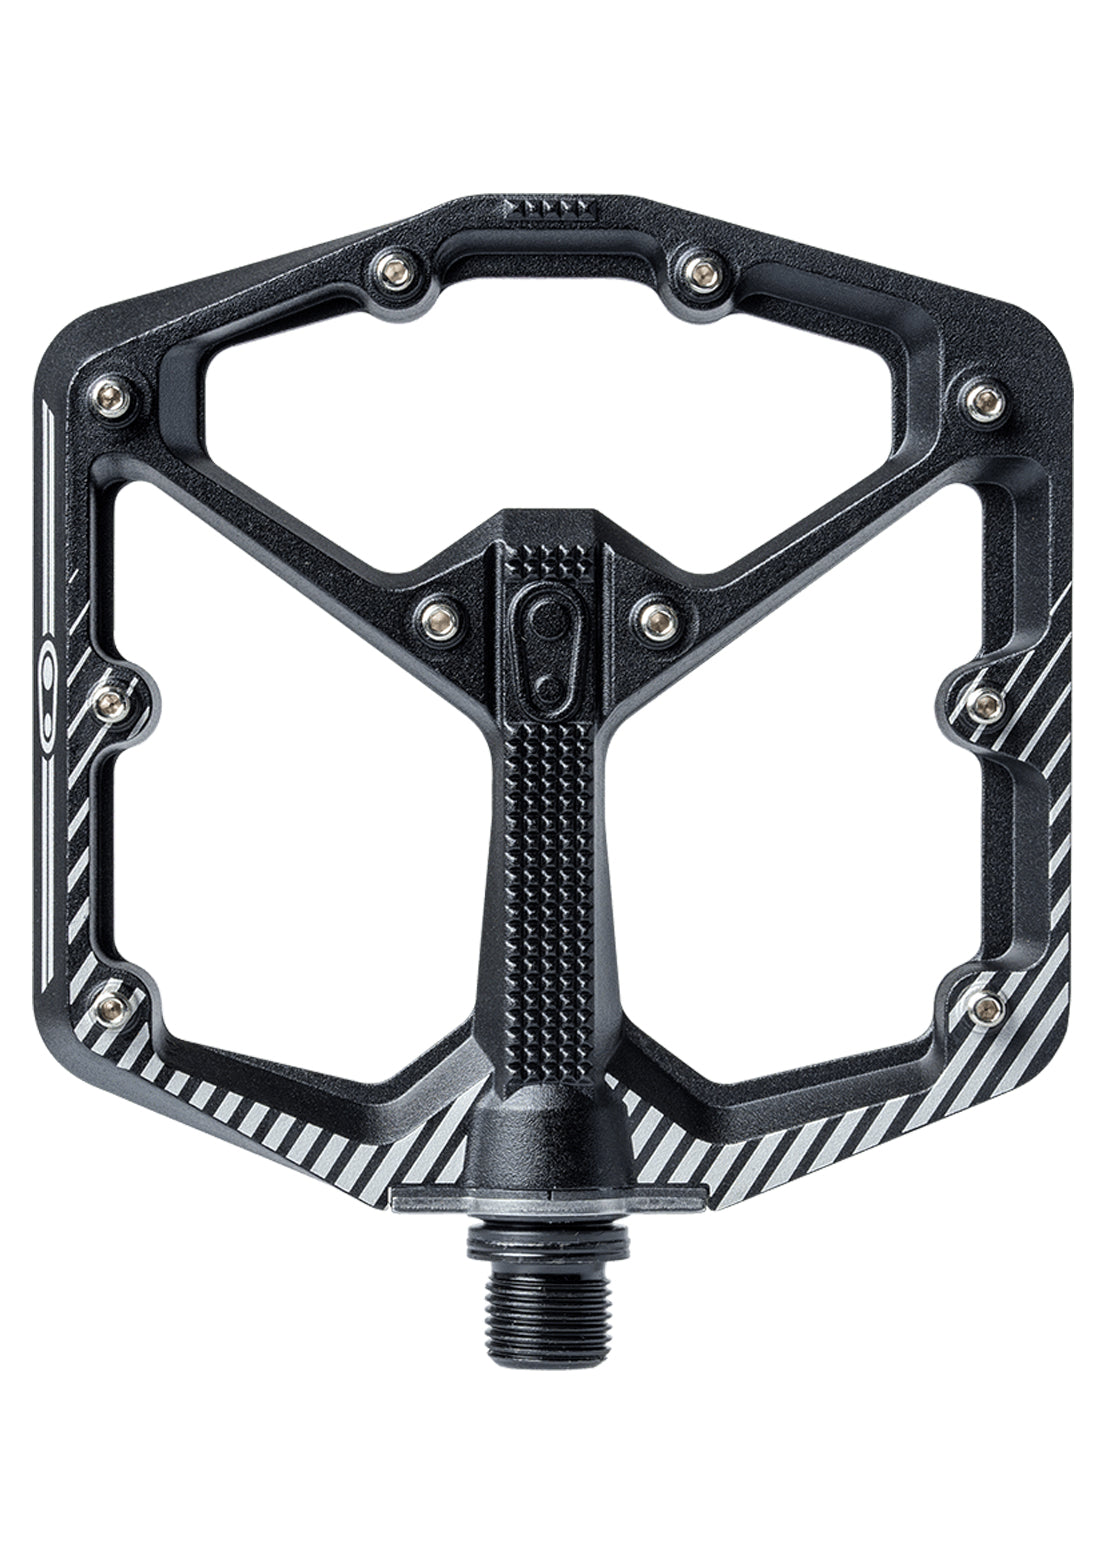 Crank Brothers Stamp 7 Large Mountain Bike Pedals Danny MacAskill Signature Edition K1816283